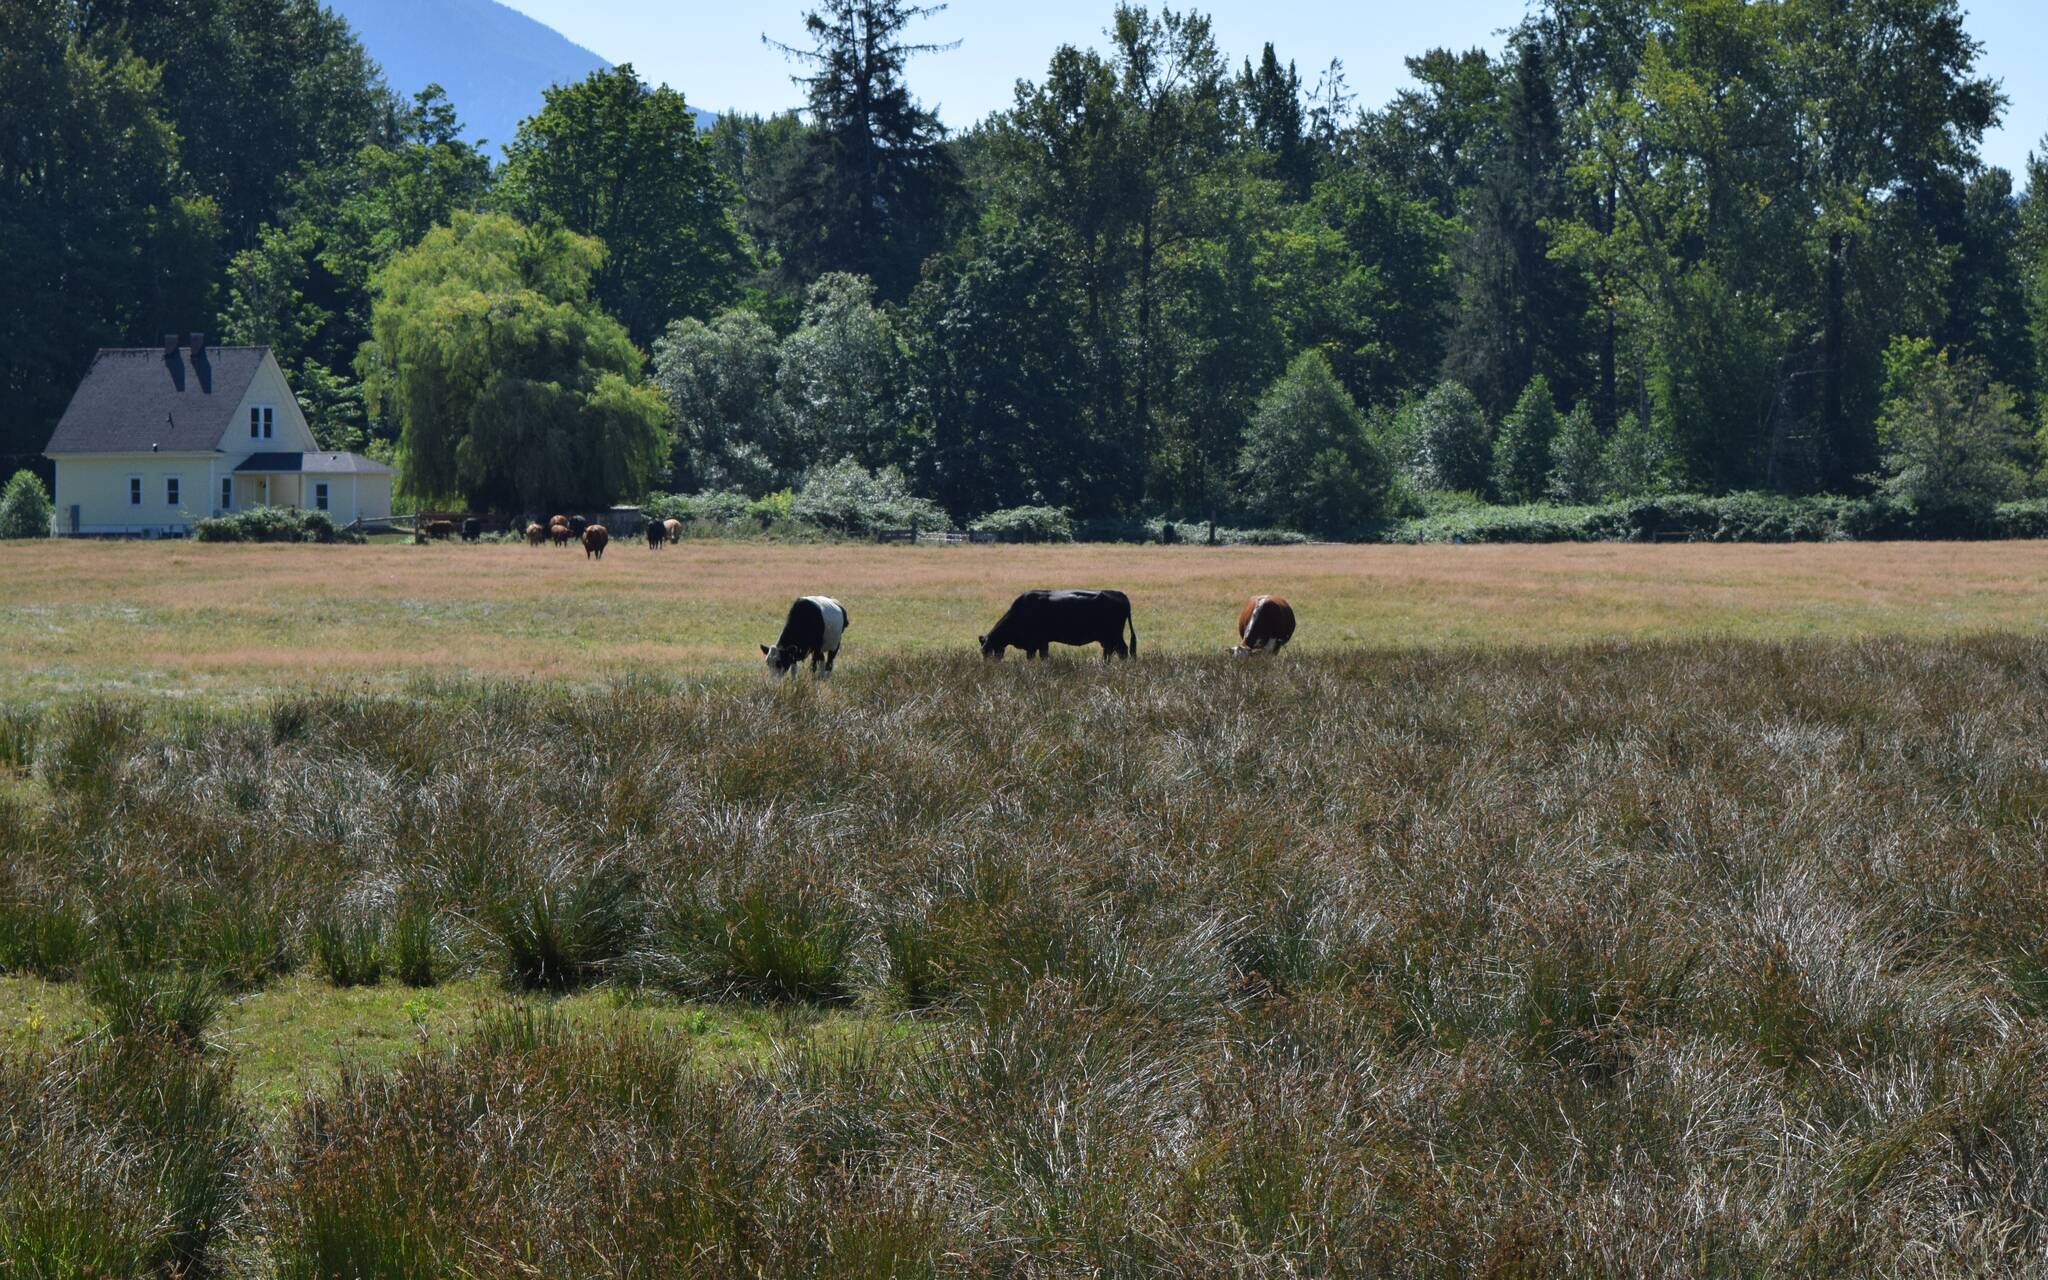 Pitt Meadows city council endorsed recommendations to adjust taxation for B.C. farmland to try and help reduce the amount of farmland that is currently vacant or unused. (Black Press Media files)